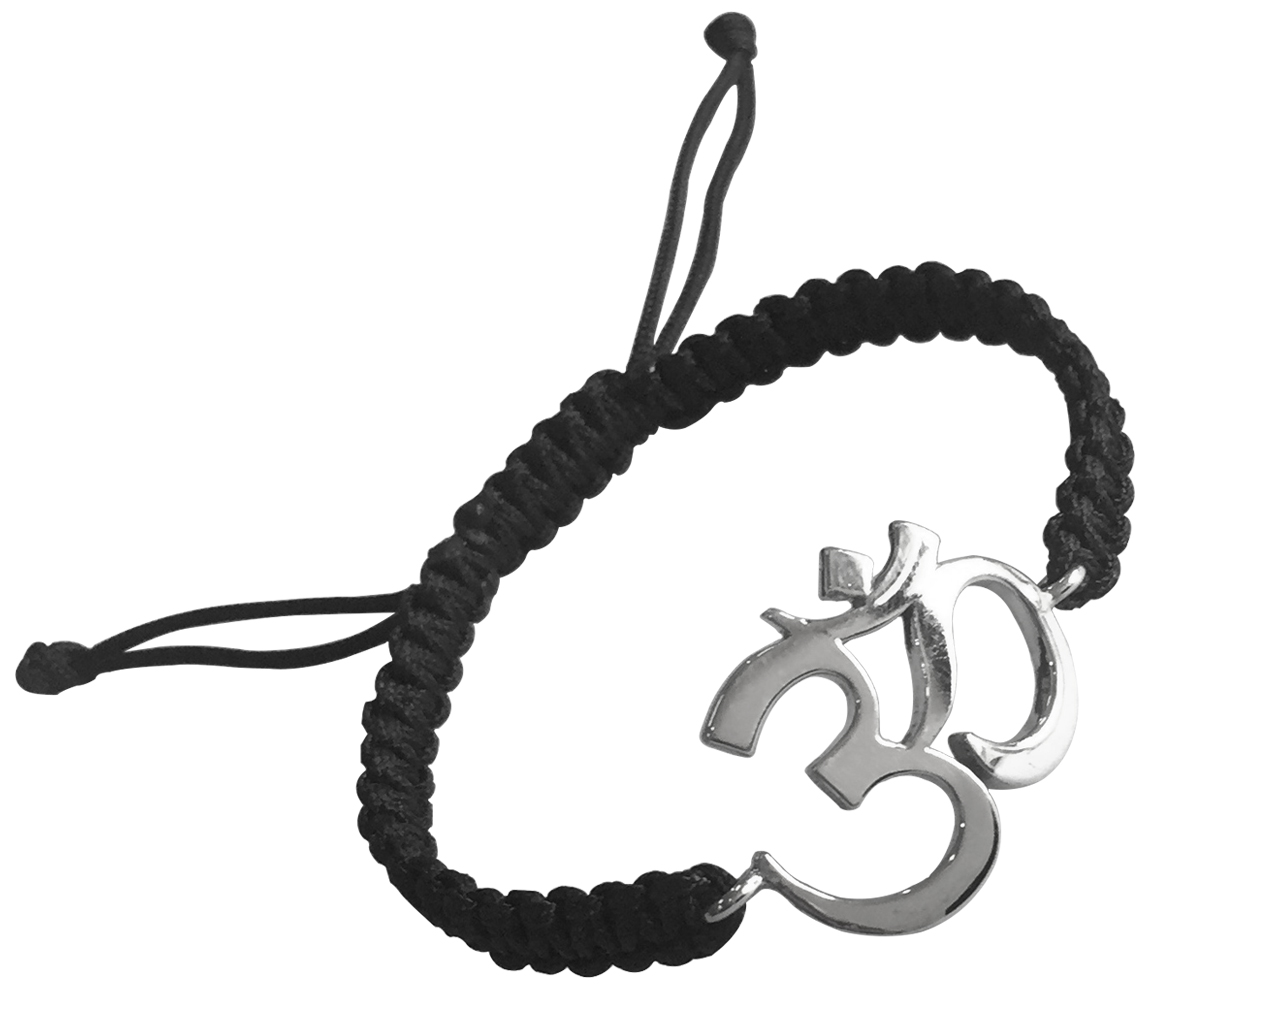 AUMKAARA Om and Sai Baba Black Silver Charm Bracelet with Adjustable Strap  for Men : Amazon.in: Jewellery